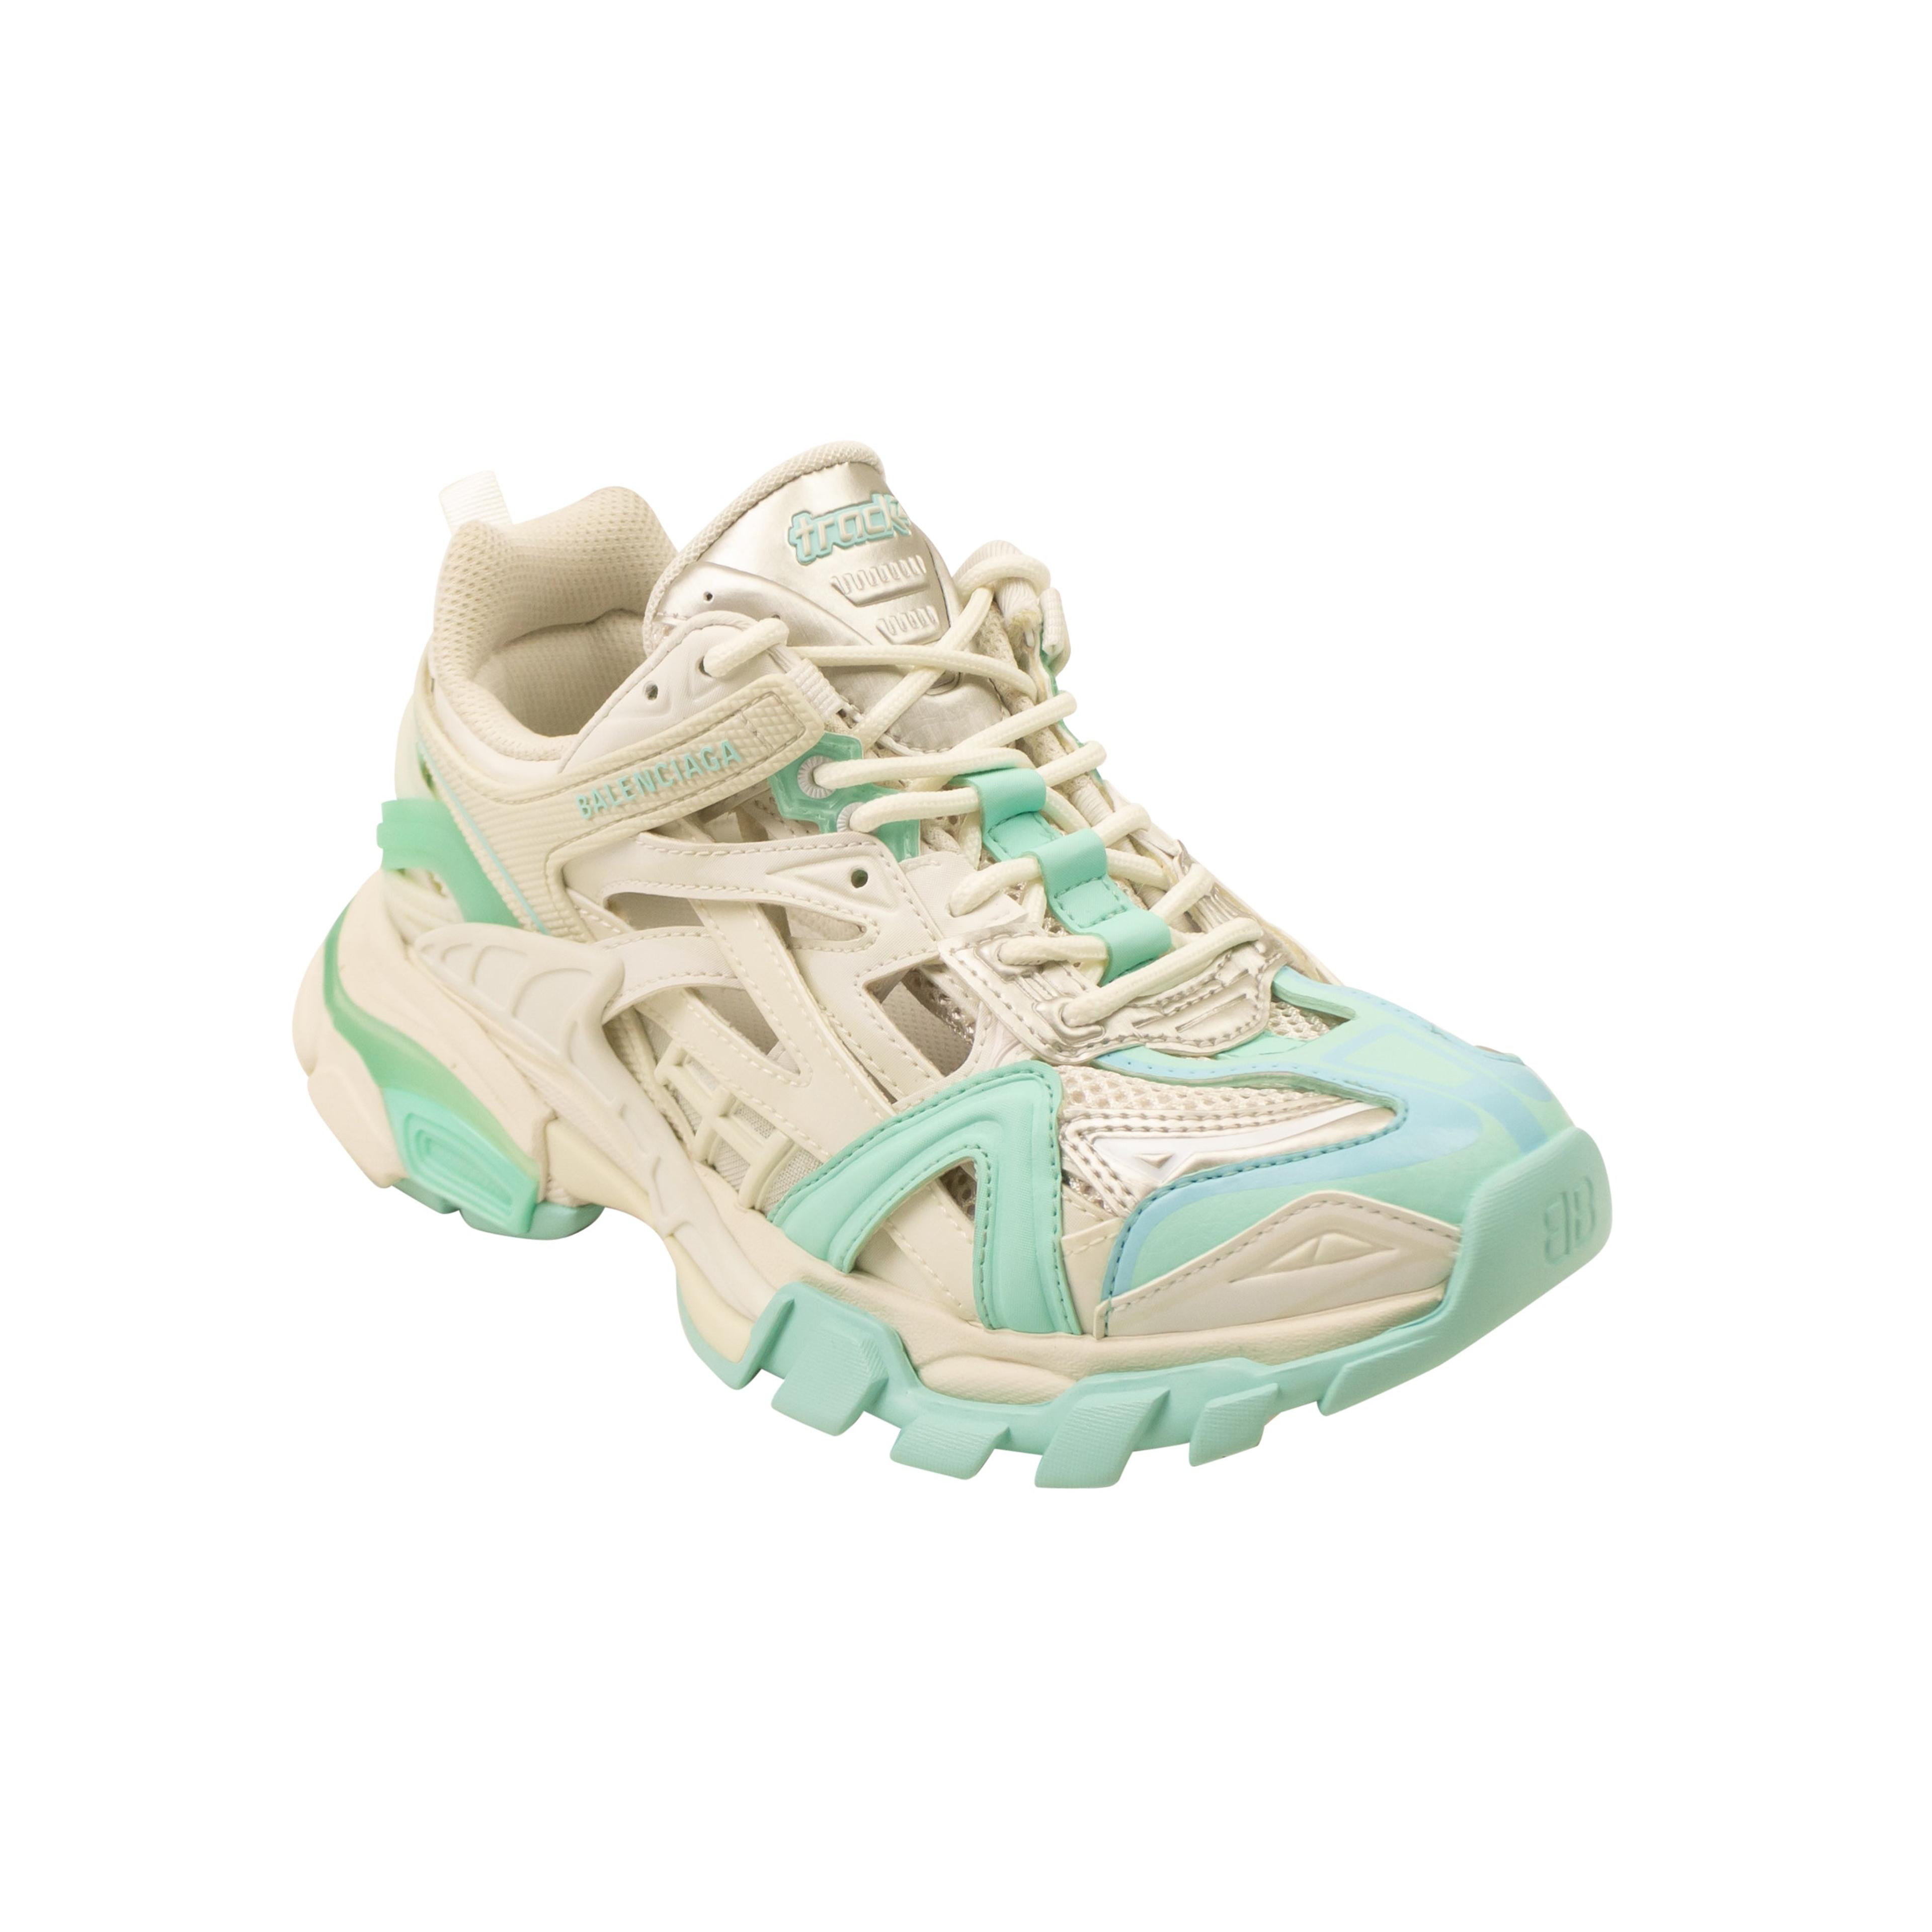 Alternate View 1 of Women's White And Green Track 2 Sneakers